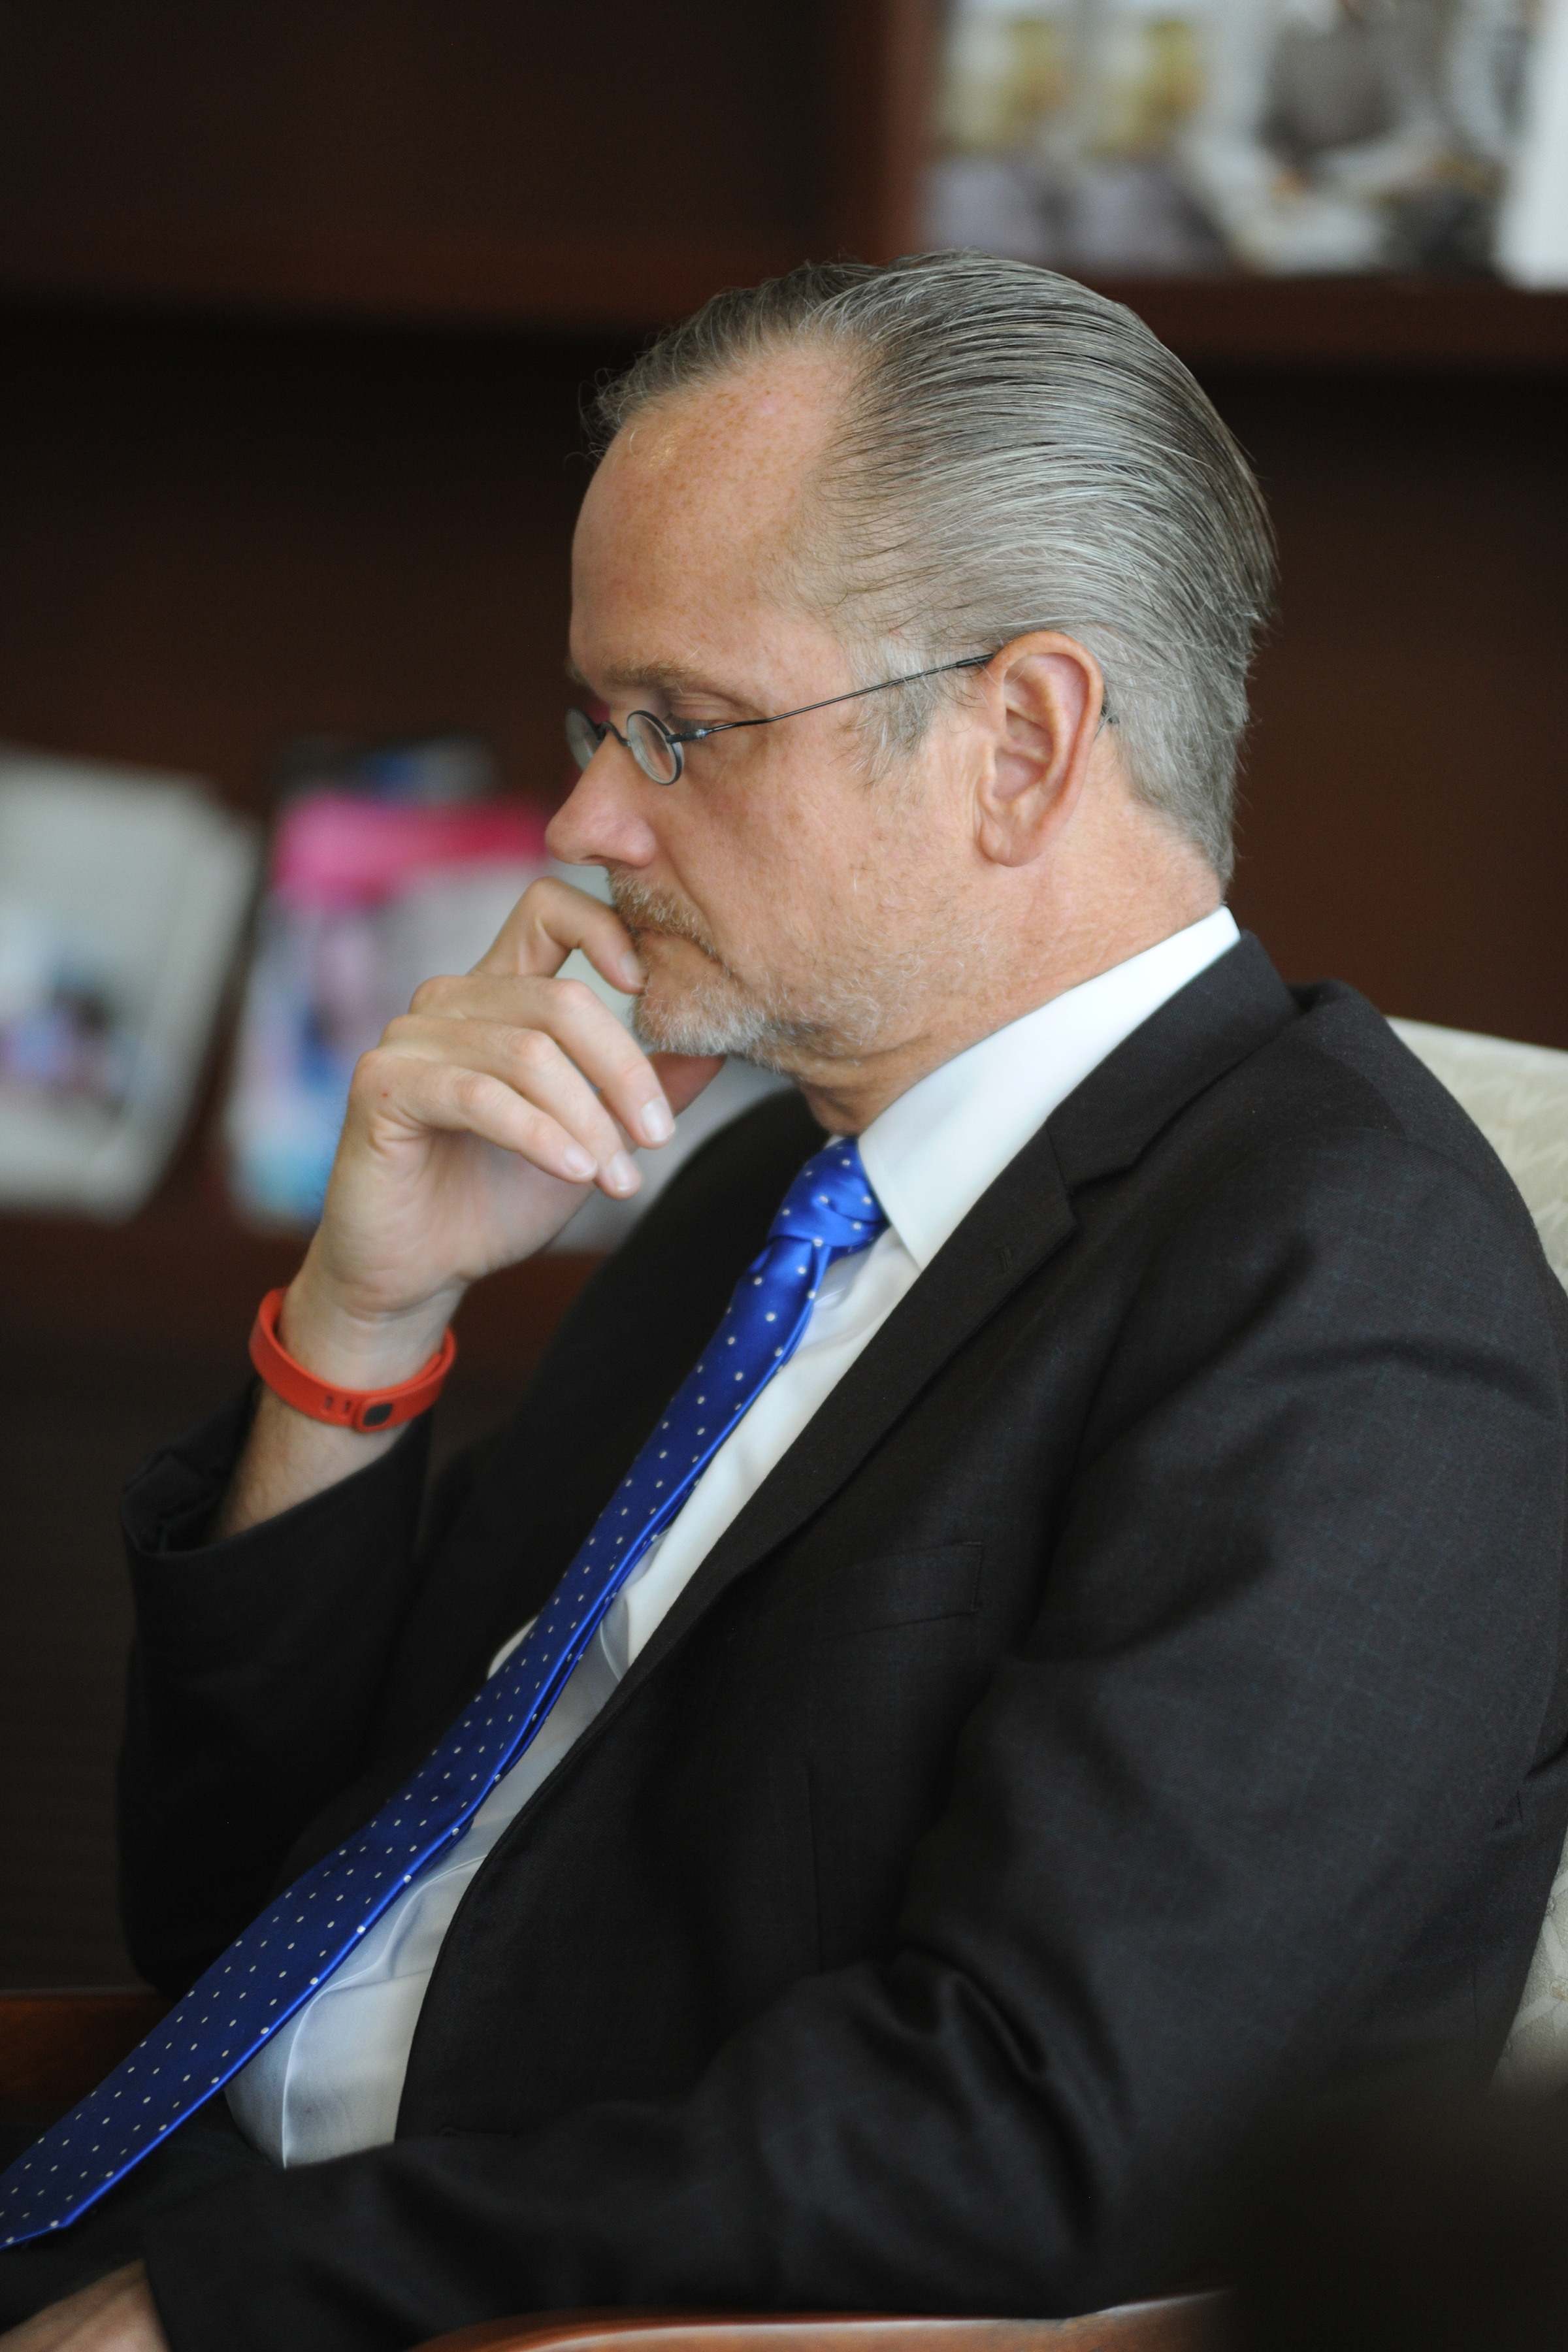 Lawrence Lessig, Harvard Law School professor, New York Times best-selling author, recent presidential candidate and esteemed speaker at the Fall LHP Roundtable session.